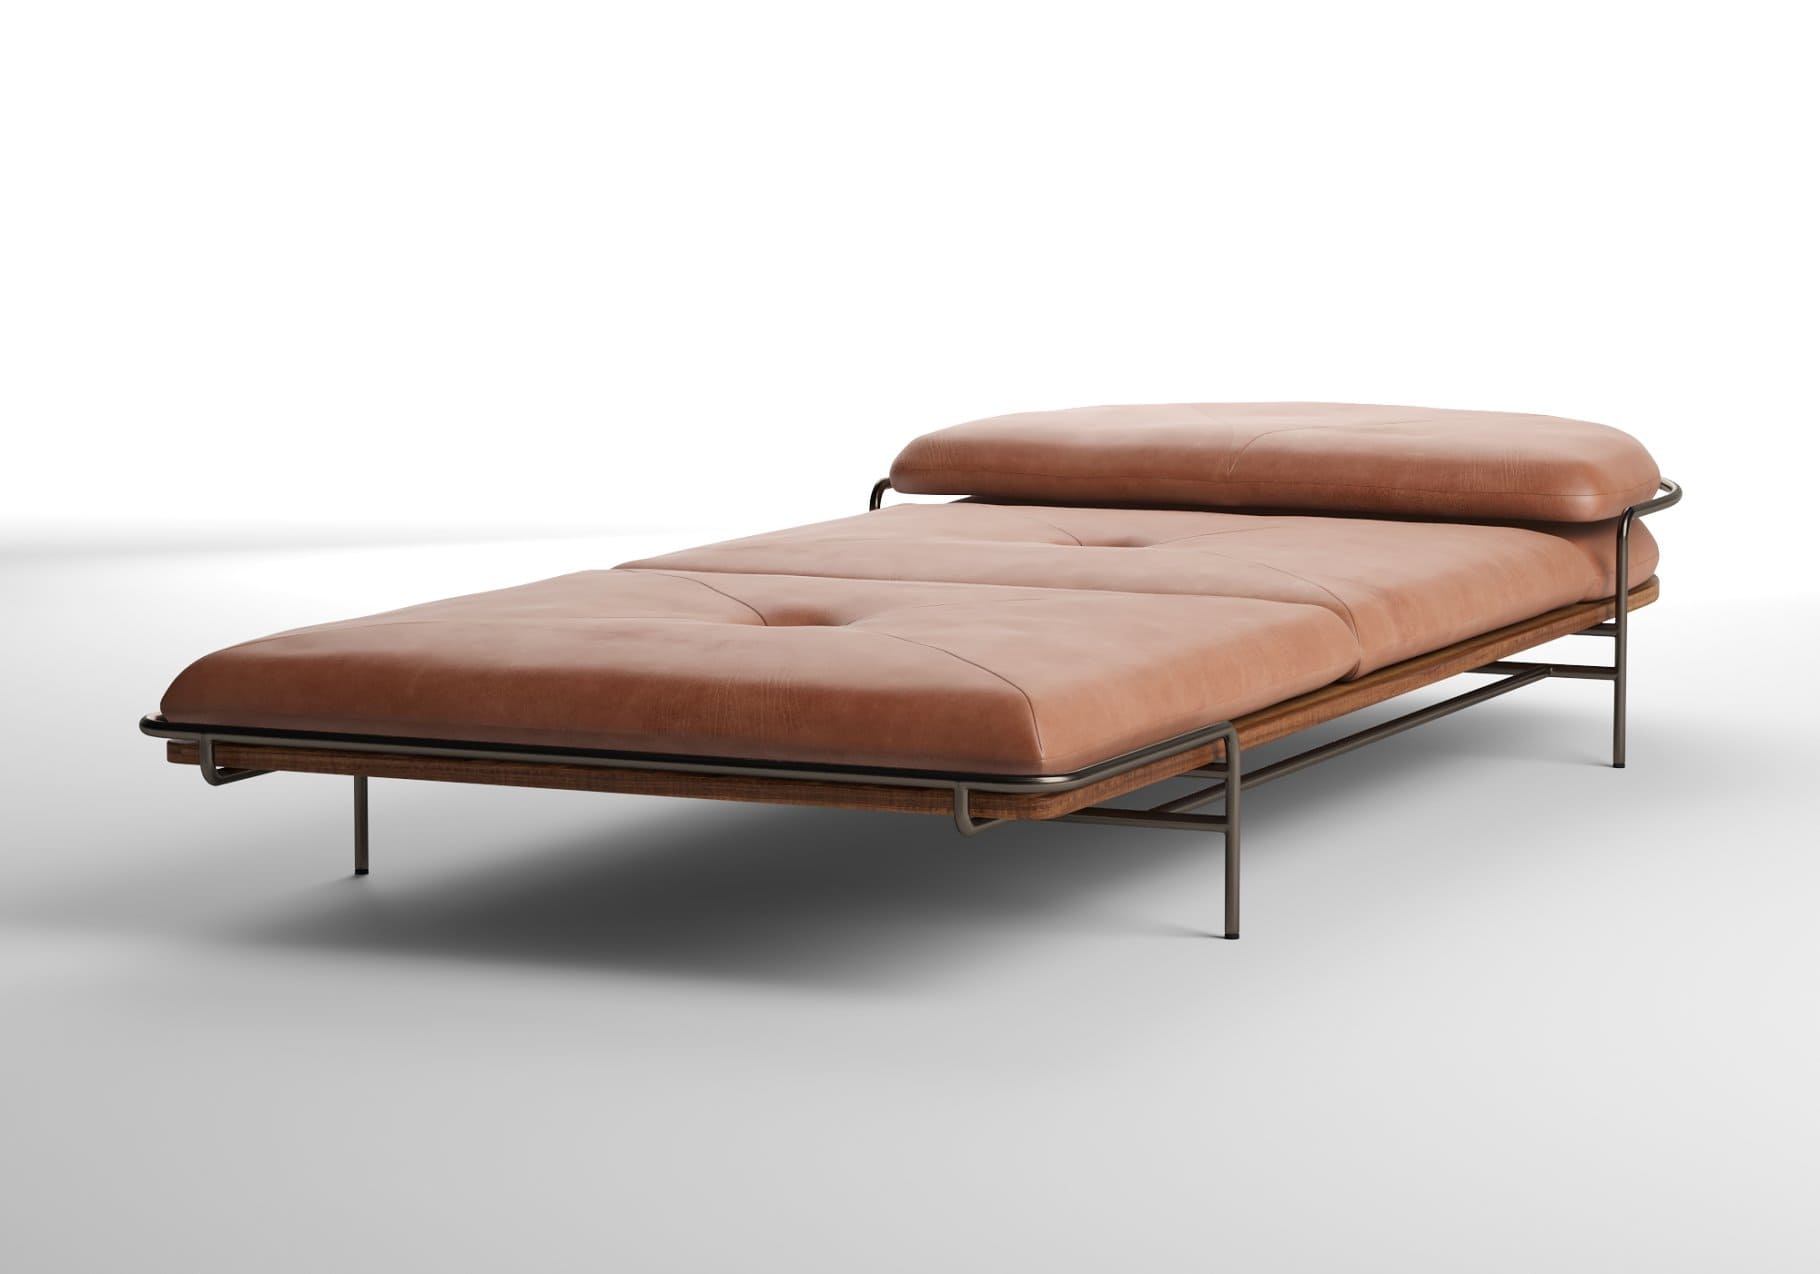 The photo shows the lower part of the Geometric Daybed by Bassam fellows.